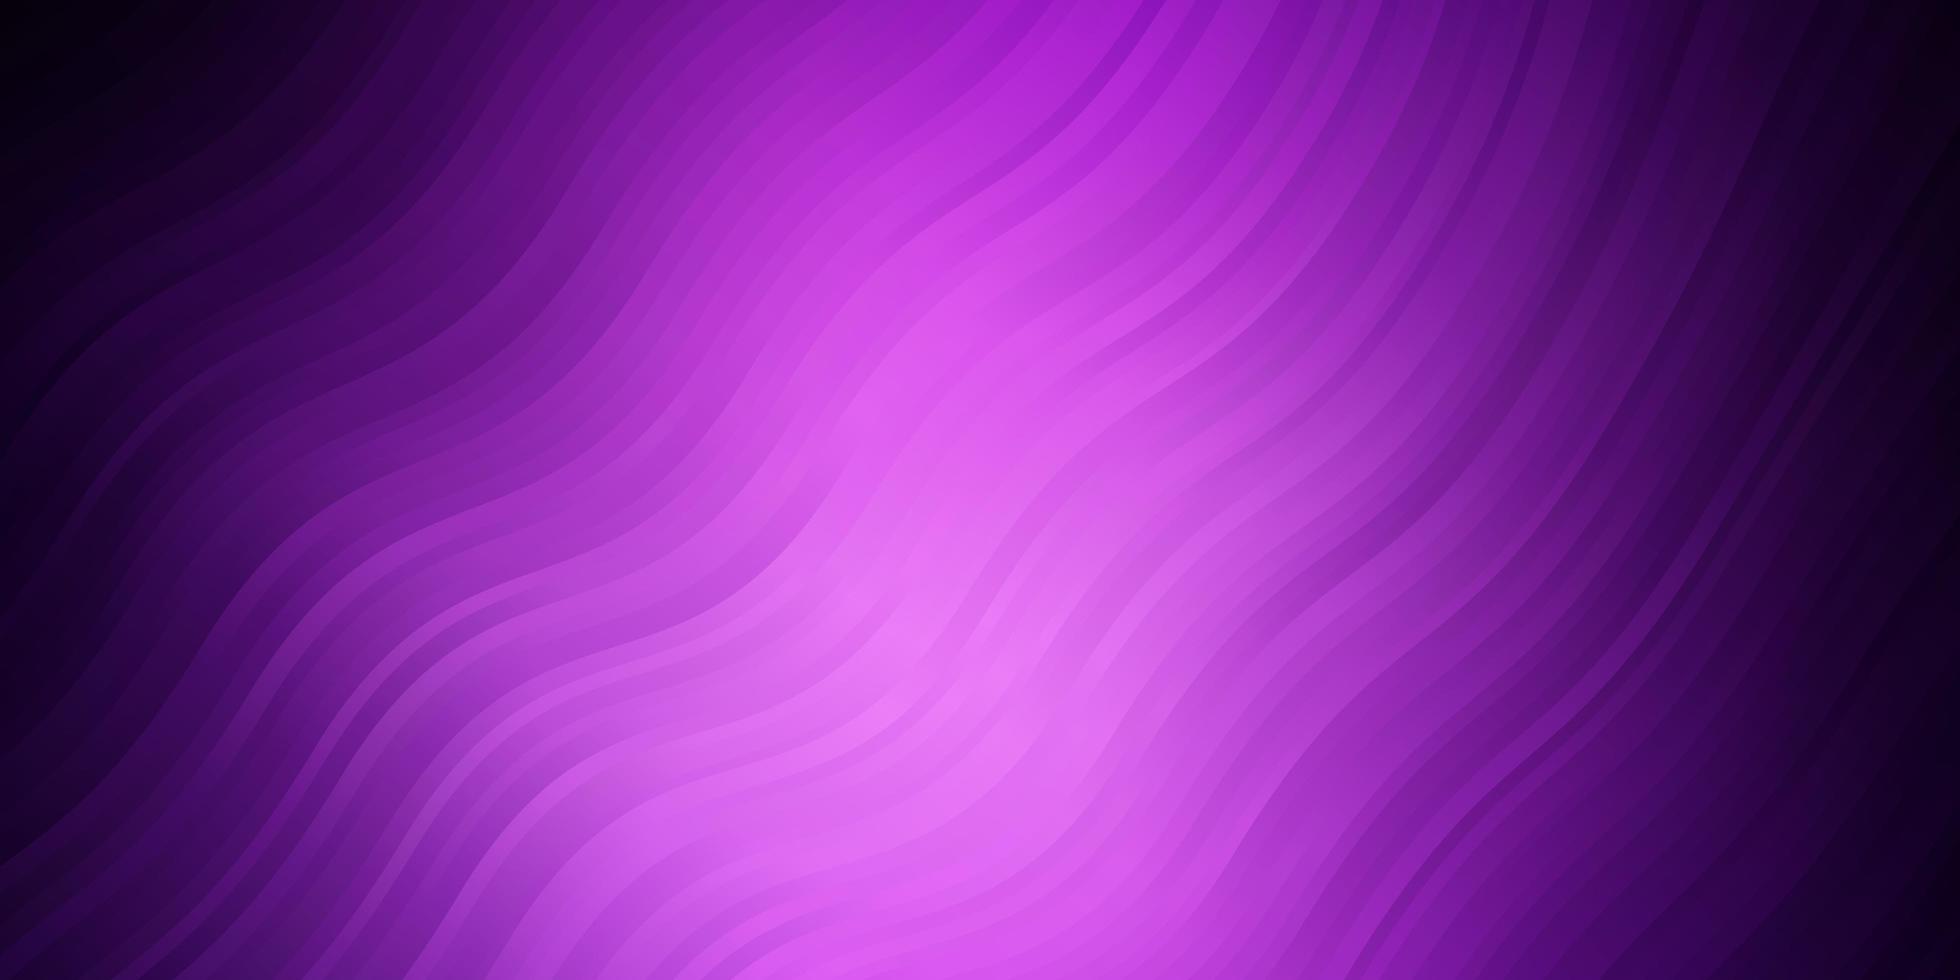 Dark Purple vector background with curves. Bright sample with colorful bent lines, shapes. Smart design for your promotions.